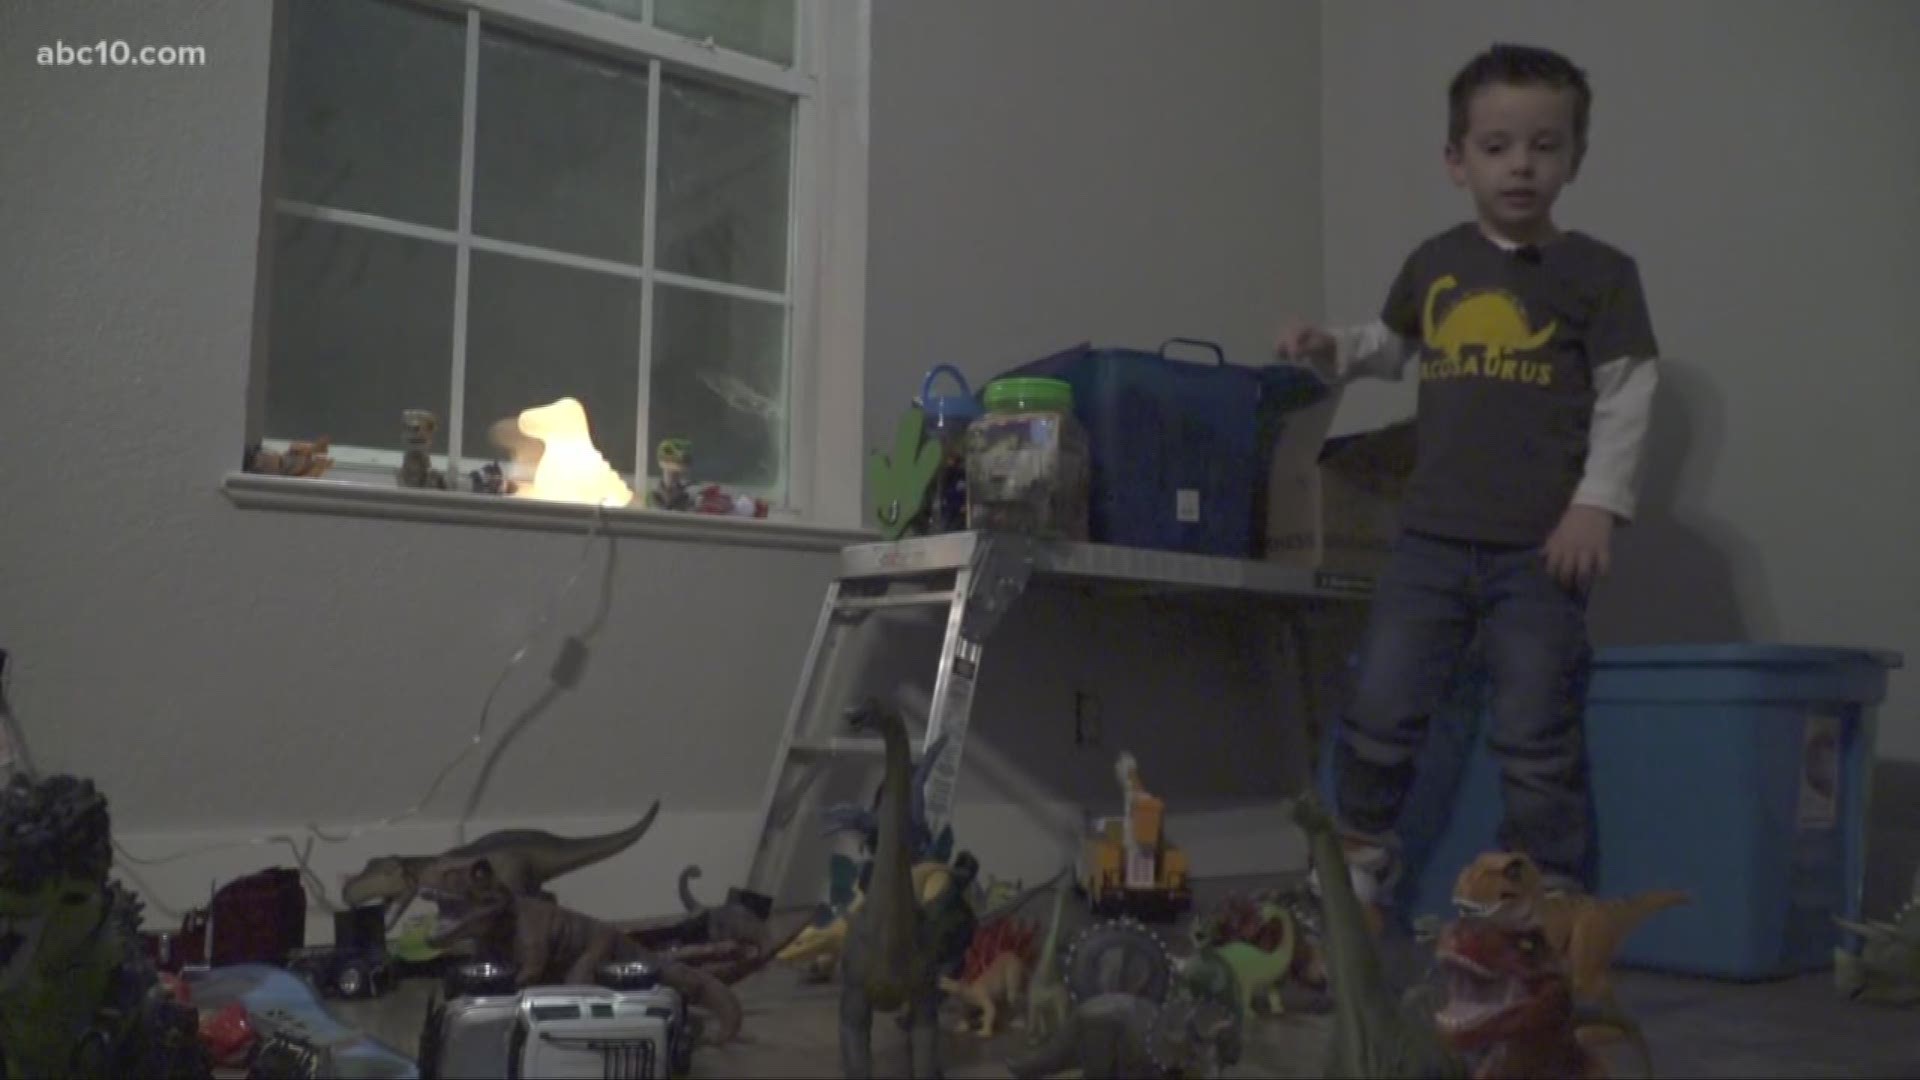 Riley's family lost their home to the Camp Fire in early November. Inside, Riley's treasured dinosaur collection. His aunt took to Facebook to let the community know, and soon packages started to arrive.